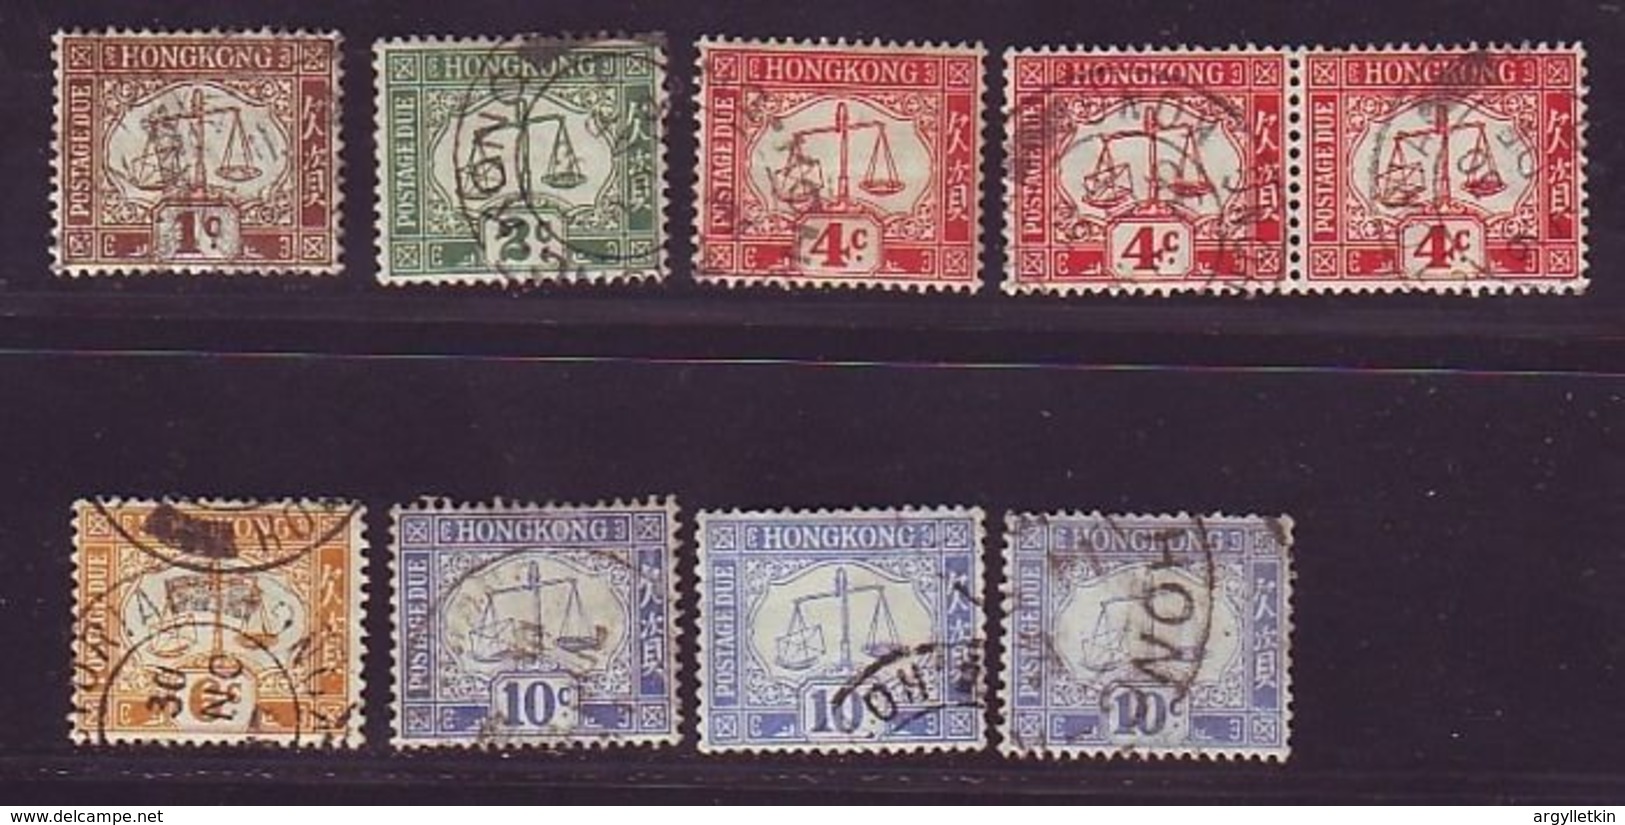 HONG KONG POSTAGE DUES 1923 SET & EXTRAS FINE USED - Used Stamps